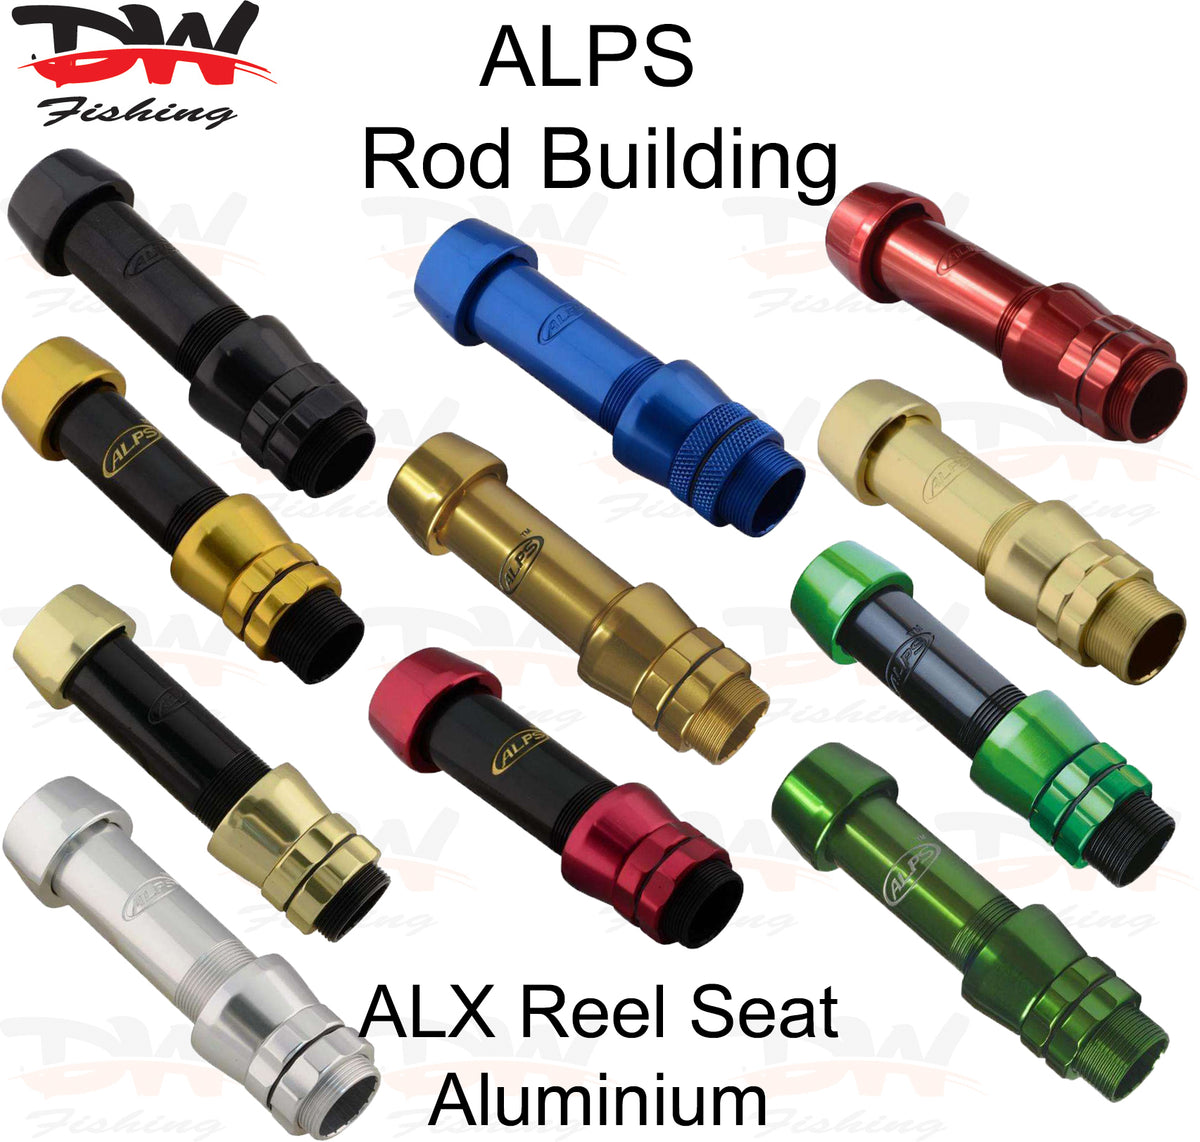 ALPS ALX Heavy Duty Alloy Reel Seat | Rod Building | Dave's Tackle Bag